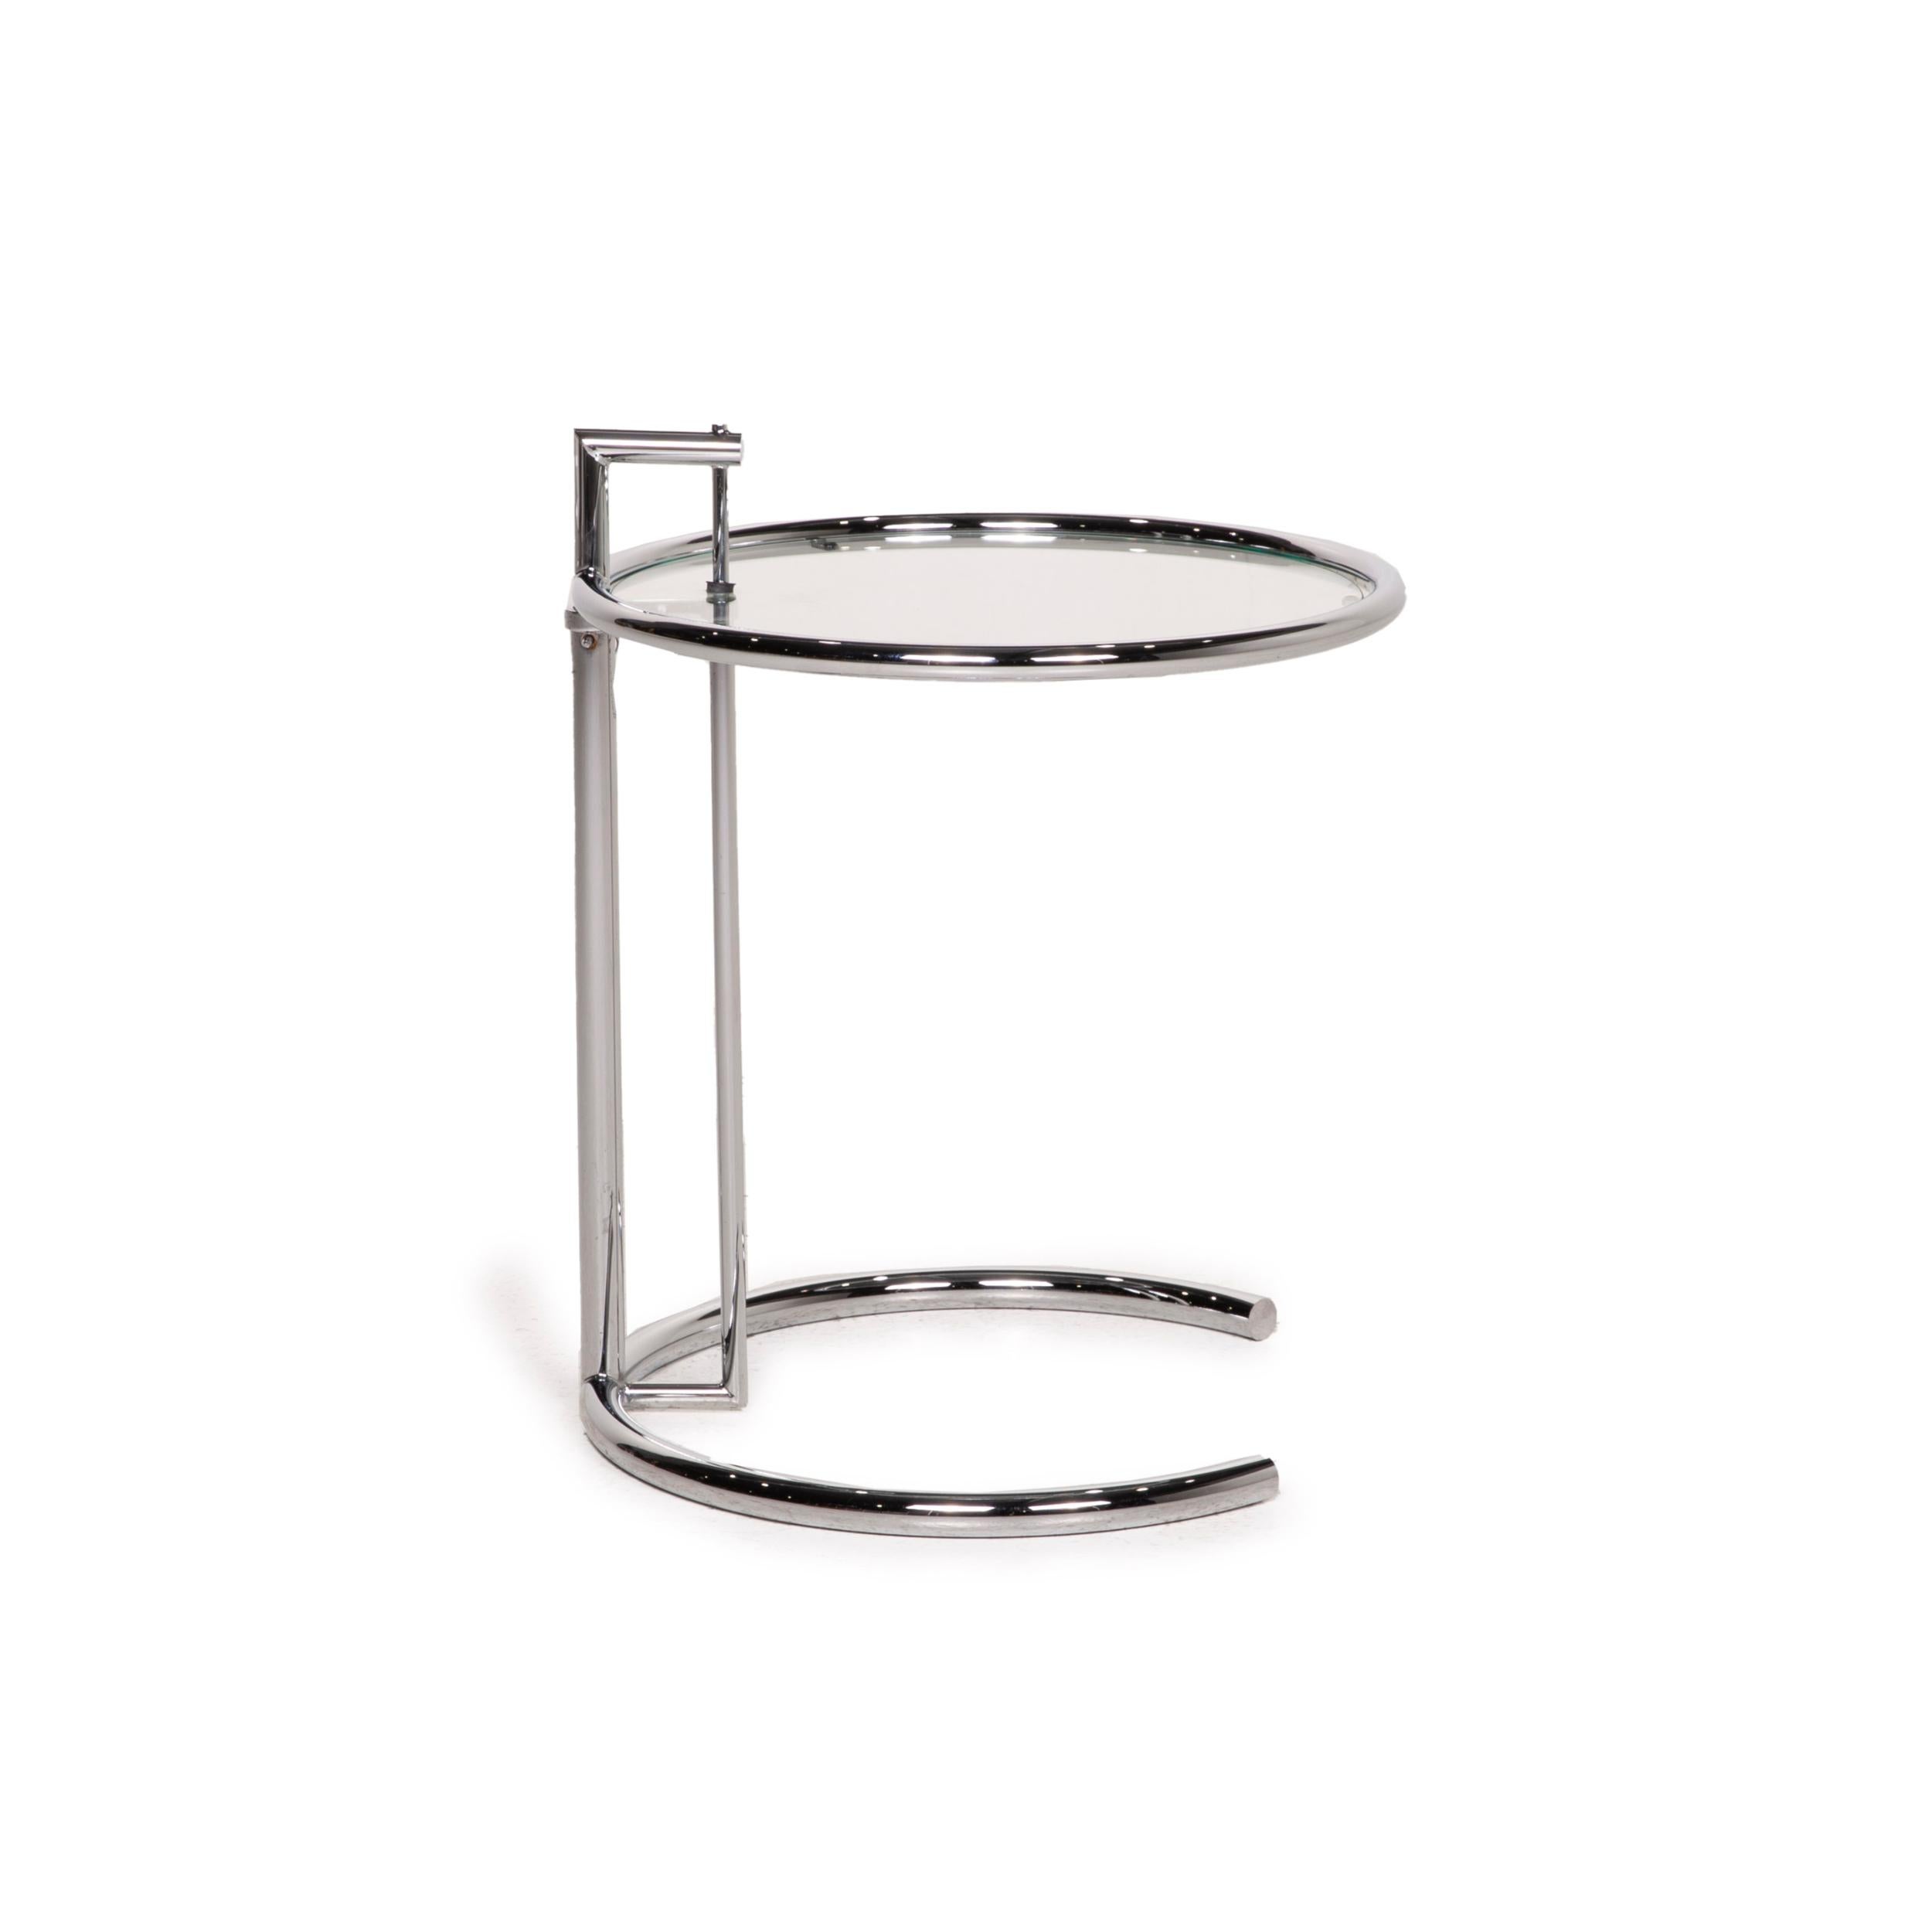 Contemporary ClassiCon Adjustable Table E1027 Glass Table Side Table Chrome by Eileen Gray